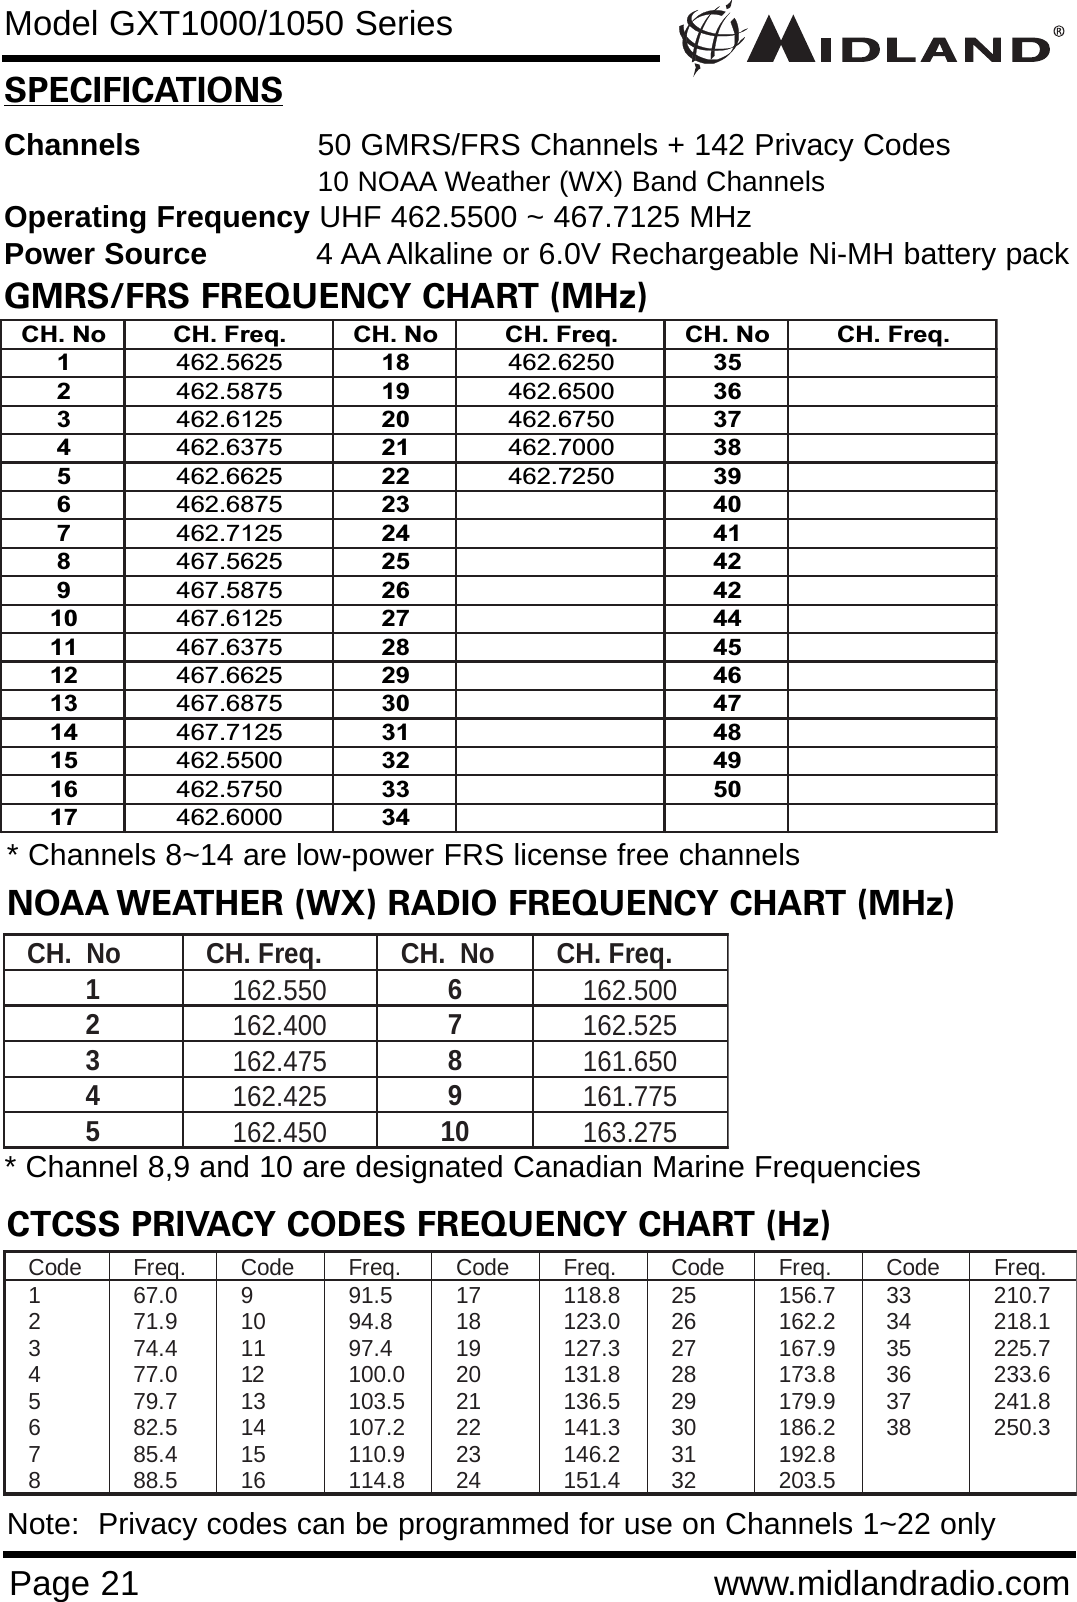 Page 21 www.midlandradio.comSPECIFICATIONSChannels 50 GMRS/FRS Channels + 142 Privacy Codes10 NOAA Weather (WX) Band Channels Operating Frequency UHF 462.5500 ~ 467.7125 MHzPower Source 4 AA Alkaline or 6.0V Rechargeable Ni-MH battery packGMRS/FRS FREQUENCY CHART (MHz)CH. No CH. Freq. CH. No CH. Freq. CH. No CH. Freq.1462.5625 18 462.6250 352462.5875 19 462.6500 363462.6125 20 462.6750 374462.6375 21 462.7000 385462.6625 22 462.7250 396462.6875 23 407462.7125 24 418467.5625 25 429467.5875 26 4210 467.6125 27 4411 467.6375 28 4512 467.6625 29 4613 467.6875 30 4714 467.7125 31 4815 462.5500 32 4916 462.5750 33 5017 462.6000 34NOAA WEATHER (WX) RADIO FREQUENCY CHART (MHz)CH.  No  CH. Freq.  CH.  No  CH. Freq. 1  162.550 6  162.500 2  162.400 7  162.525 3  162.475 8  161.650 4  162.425 9  161.775 5  162.450 10  163.275 CTCSS PRIVACY CODES FREQUENCY CHART (Hz)Code Freq.  Code Freq.  Code Freq.  Code Freq.  Code Freq.  1  67.0 9  91.5 17  118.8 25  156.7 33  210.7 2  71.9 10  94.8 18  123.0 26  162.2 34  218.1 3  74.4 11  97.4 19  127.3 27  167.9 35  225.7 4 77.0 12 100.0 20  131.8 28  173.8 36  233.6 5 79.7 13 103.5 21  136.5 29  179.9 37  241.8 6 82.5 14 107.2 22  141.3 30  186.2 38  250.3 7 85.4 15 110.9 23  146.2 31  192.8    8 88.5 16 114.8 24  151.4 32  203.5    * Channel 8,9 and 10 are designated Canadian Marine Frequencies* Channels 8~14 are low-power FRS license free channelsNote:  Privacy codes can be programmed for use on Channels 1~22 onlyModel GXT1000/1050 Series